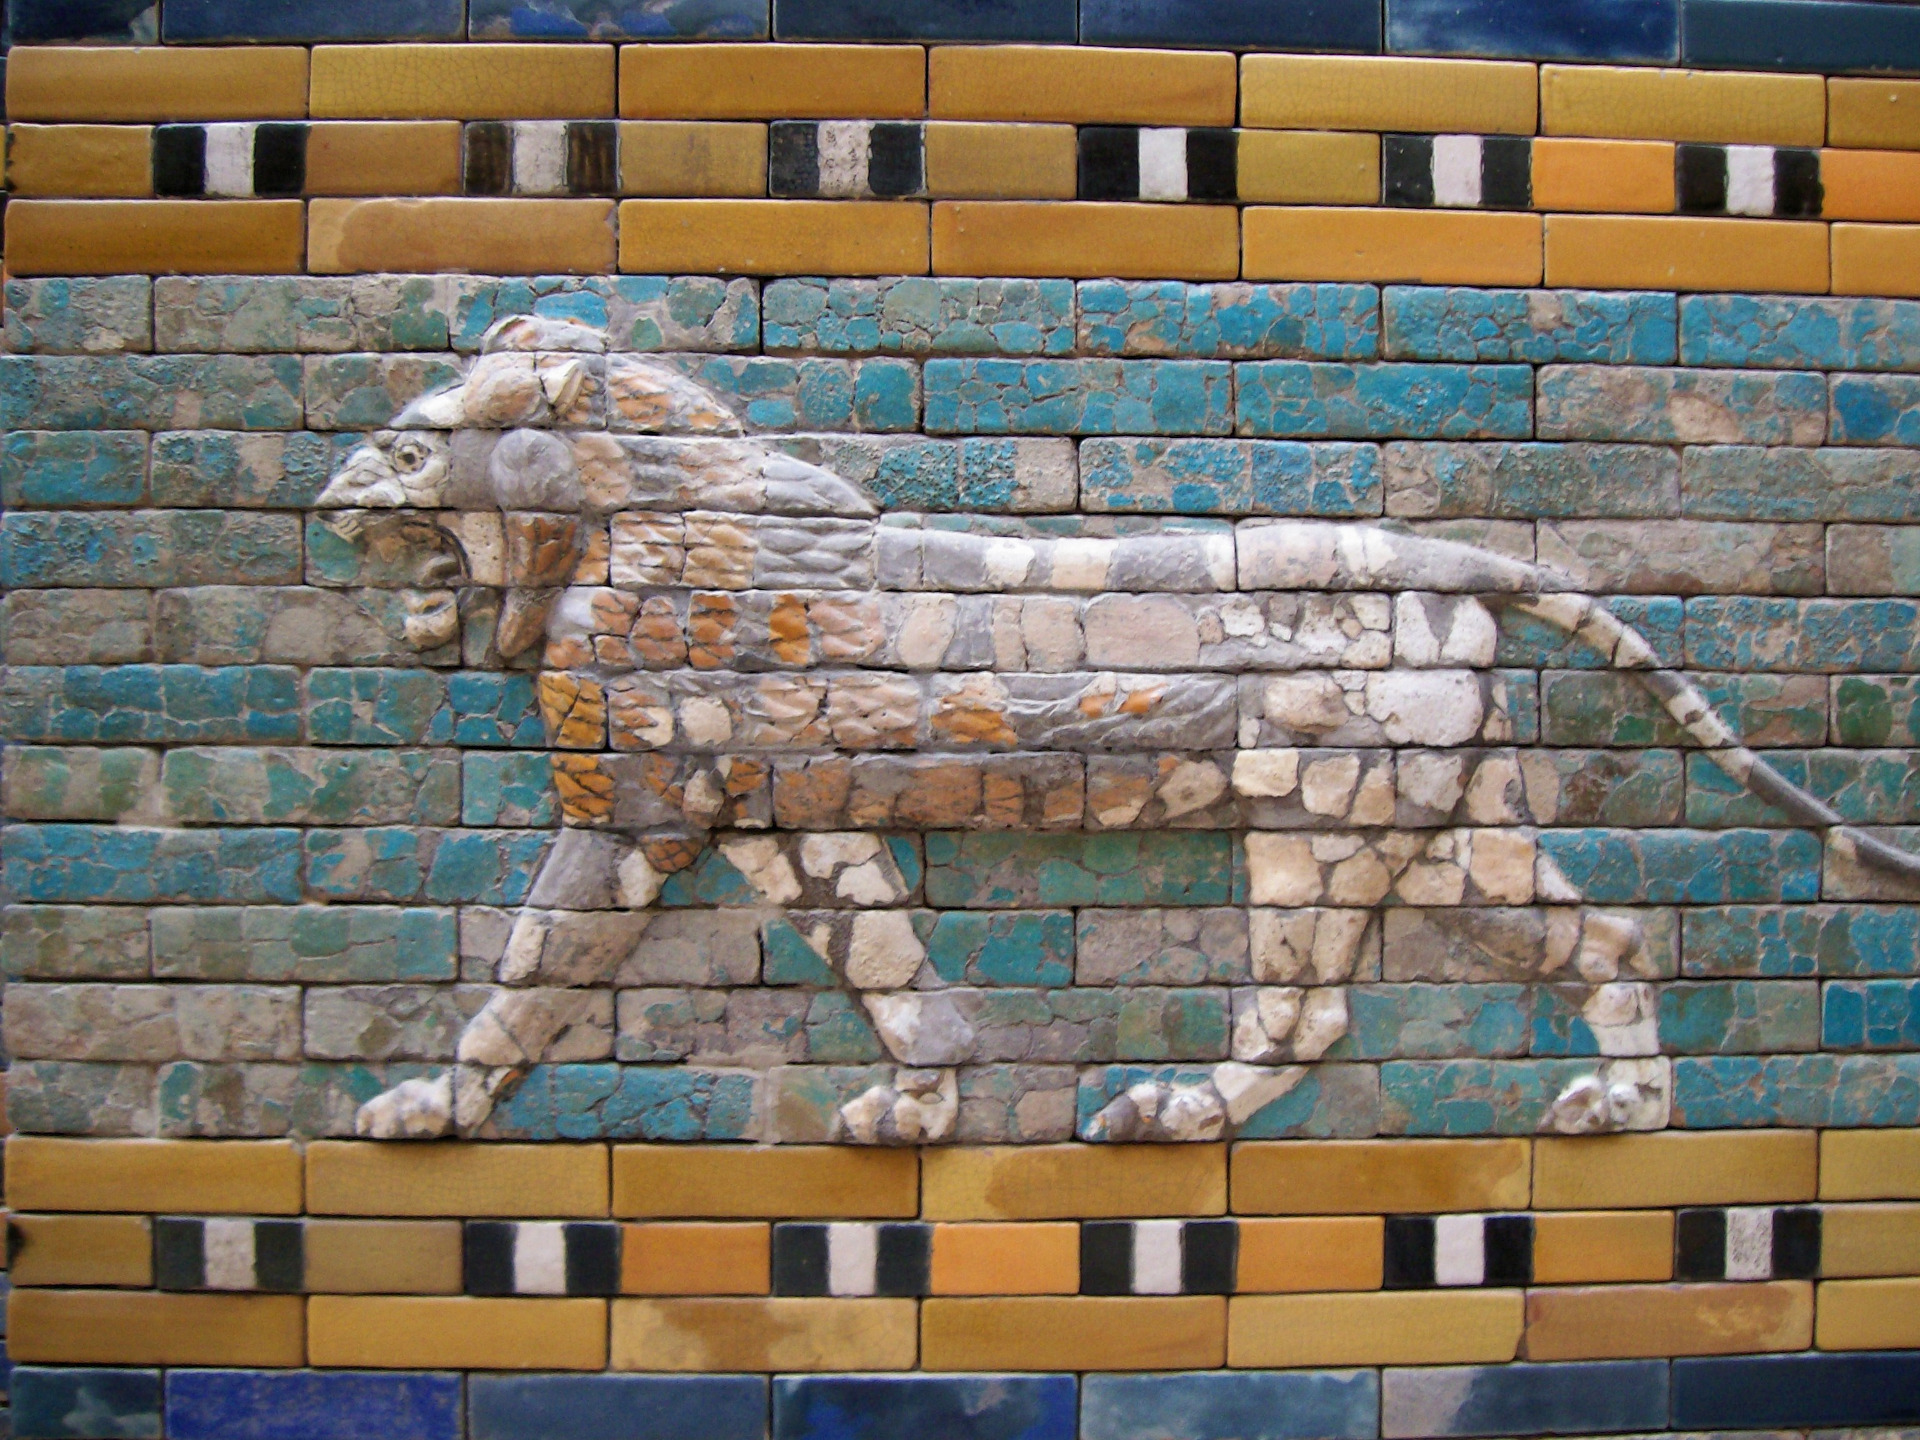 Students have rare access to museum collections, here a 'striding lion' from the Processional Way in Babylon at the Pergamon Museum in Berlin